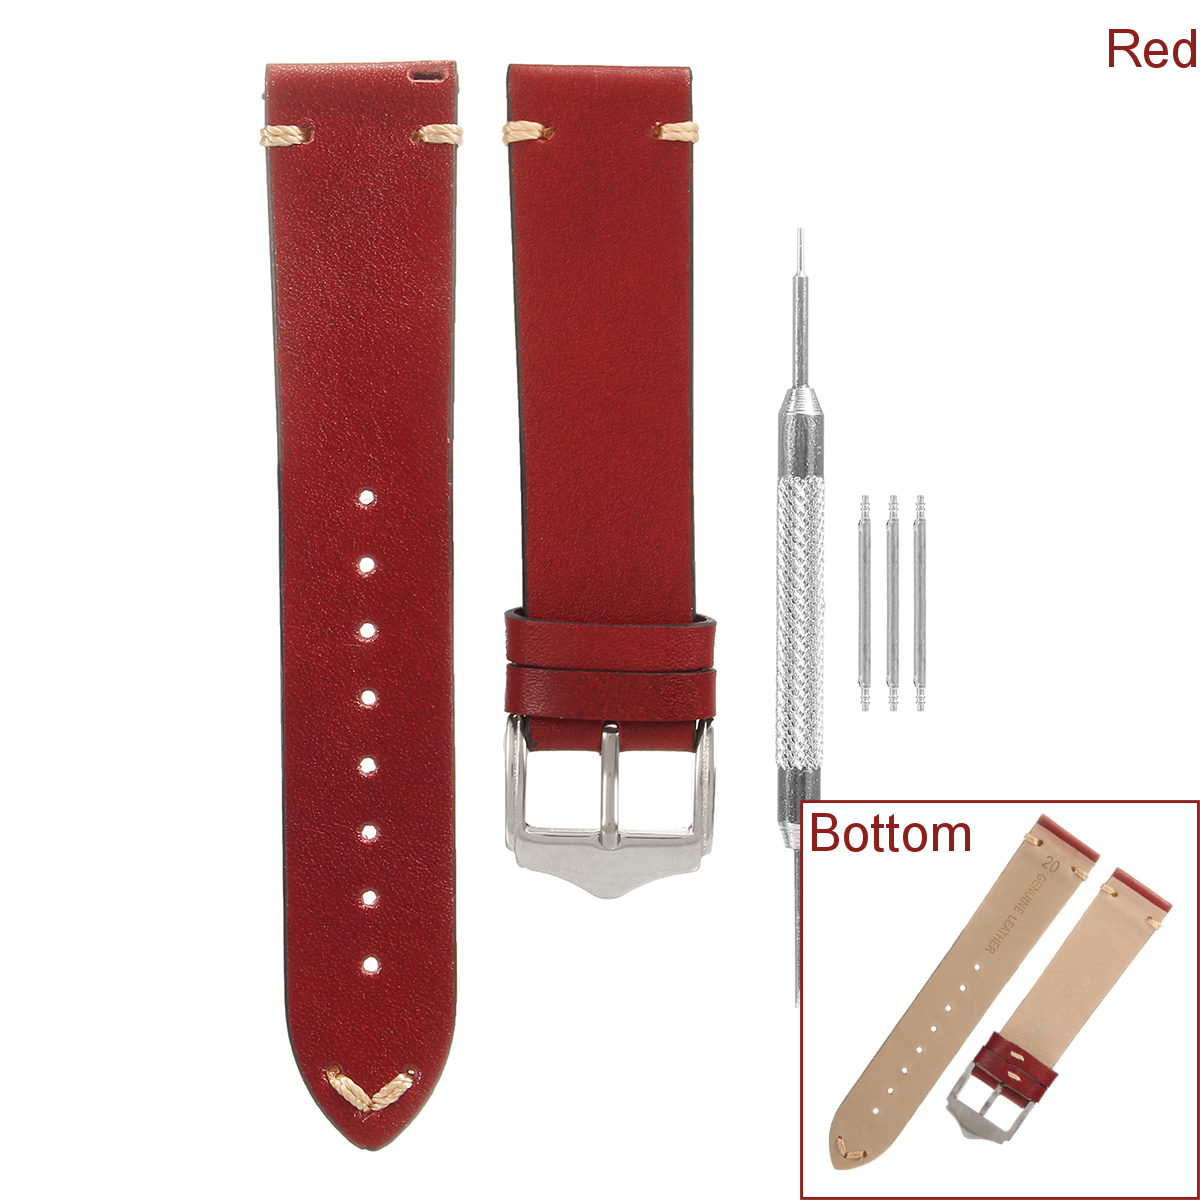 20mm-22mm-Shock-Resistant-Leather-Replacement-Strap-Watch-Band-Spring-Pars-Tool-Wristband-1264242